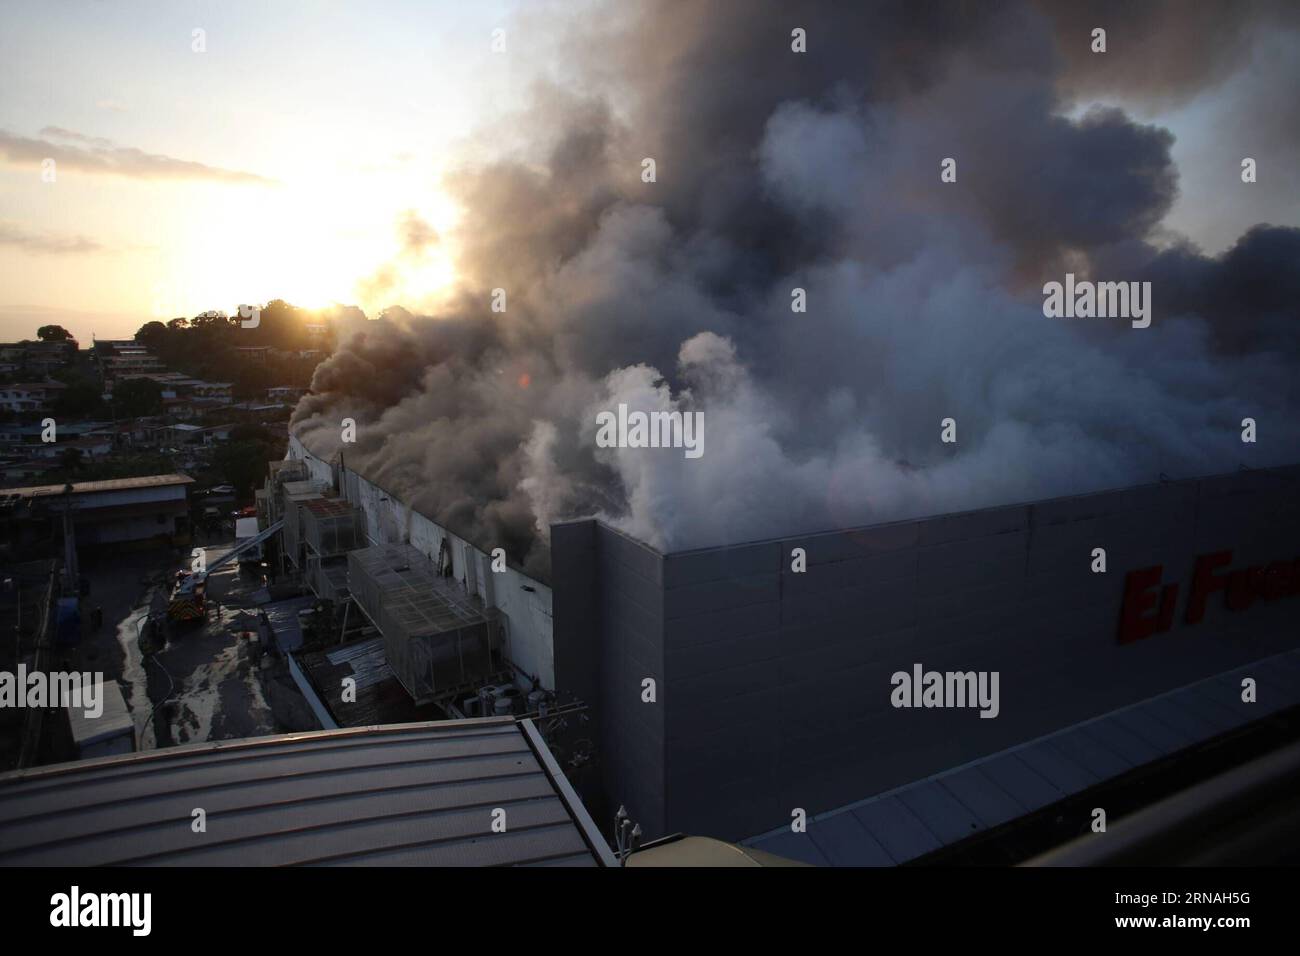 (160126) -- PANAMA CITY, Jan. 26, 2016. -- Photo taken on Jan. 26, 2016 shows the scene of the fire in El Fuerte supermarket in San Miguelito, in Panama City, capital of Panama, Jan. 26, 2016. National Director of the Panama Fire Department Jaime Villar said that the fire started about 4:30 early Tuesday. ) PANAMA-PANAMA CITY-ACCIDENT-FIRE MauricioxValenzuela PUBLICATIONxNOTxINxCHN   160126 Panama City Jan 26 2016 Photo Taken ON Jan 26 2016 Shows The Scene of The Fire in El Fuerte Supermarket in San Miguelito in Panama City Capital of Panama Jan 26 2016 National Director of The Panama Fire Dep Stock Photo